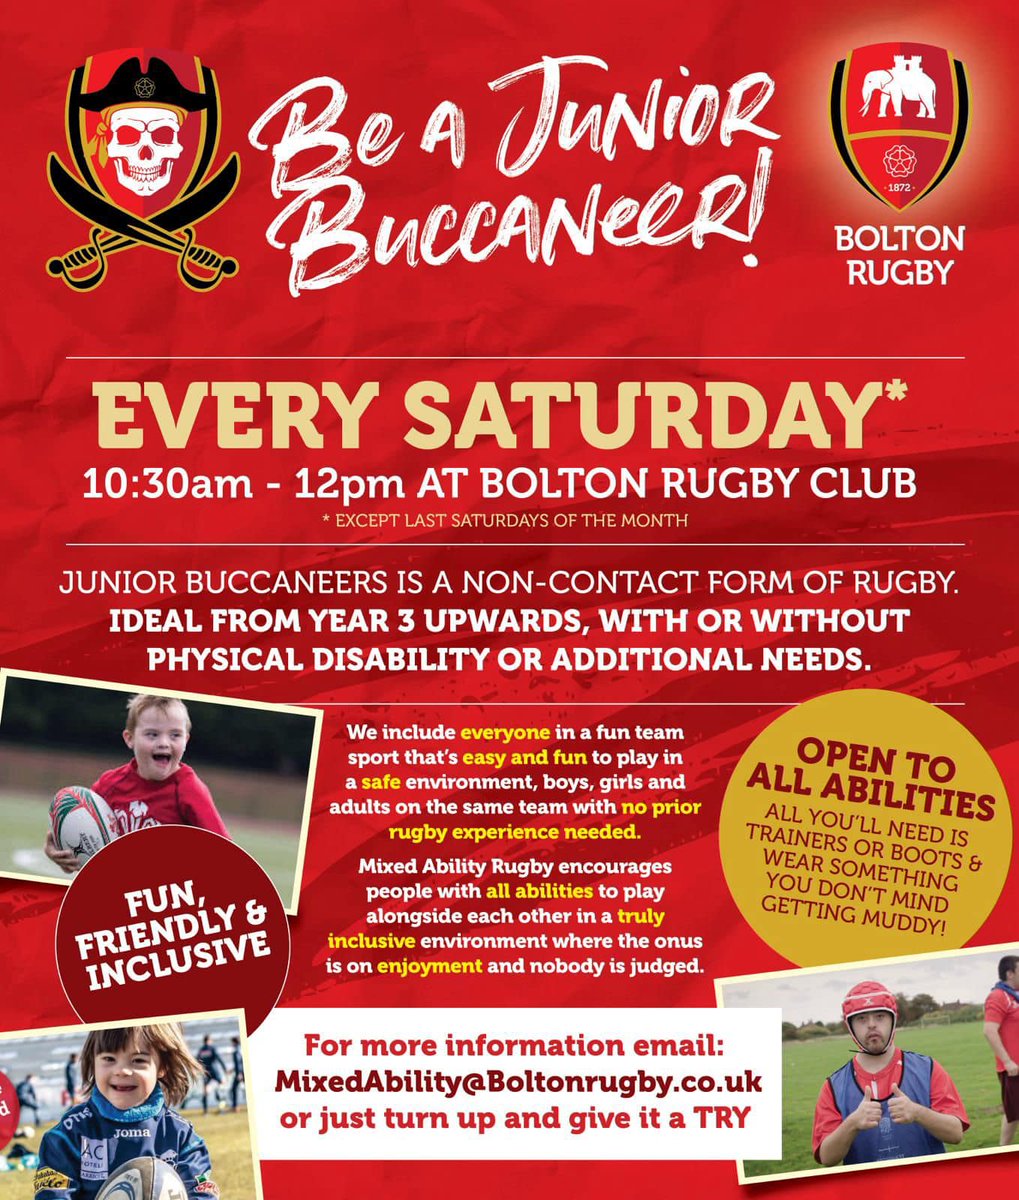 Our Junior Buccaneers Mixed Ability sessions are now on at Bolton Rugby Club every Saturday (apart from the last Saturday of every month) at 10.30am Come down & give Mixed Ability rugby a try, ALL abilities welcome to come & join in our fun & friendly sessions! #MixedAbilityRugby